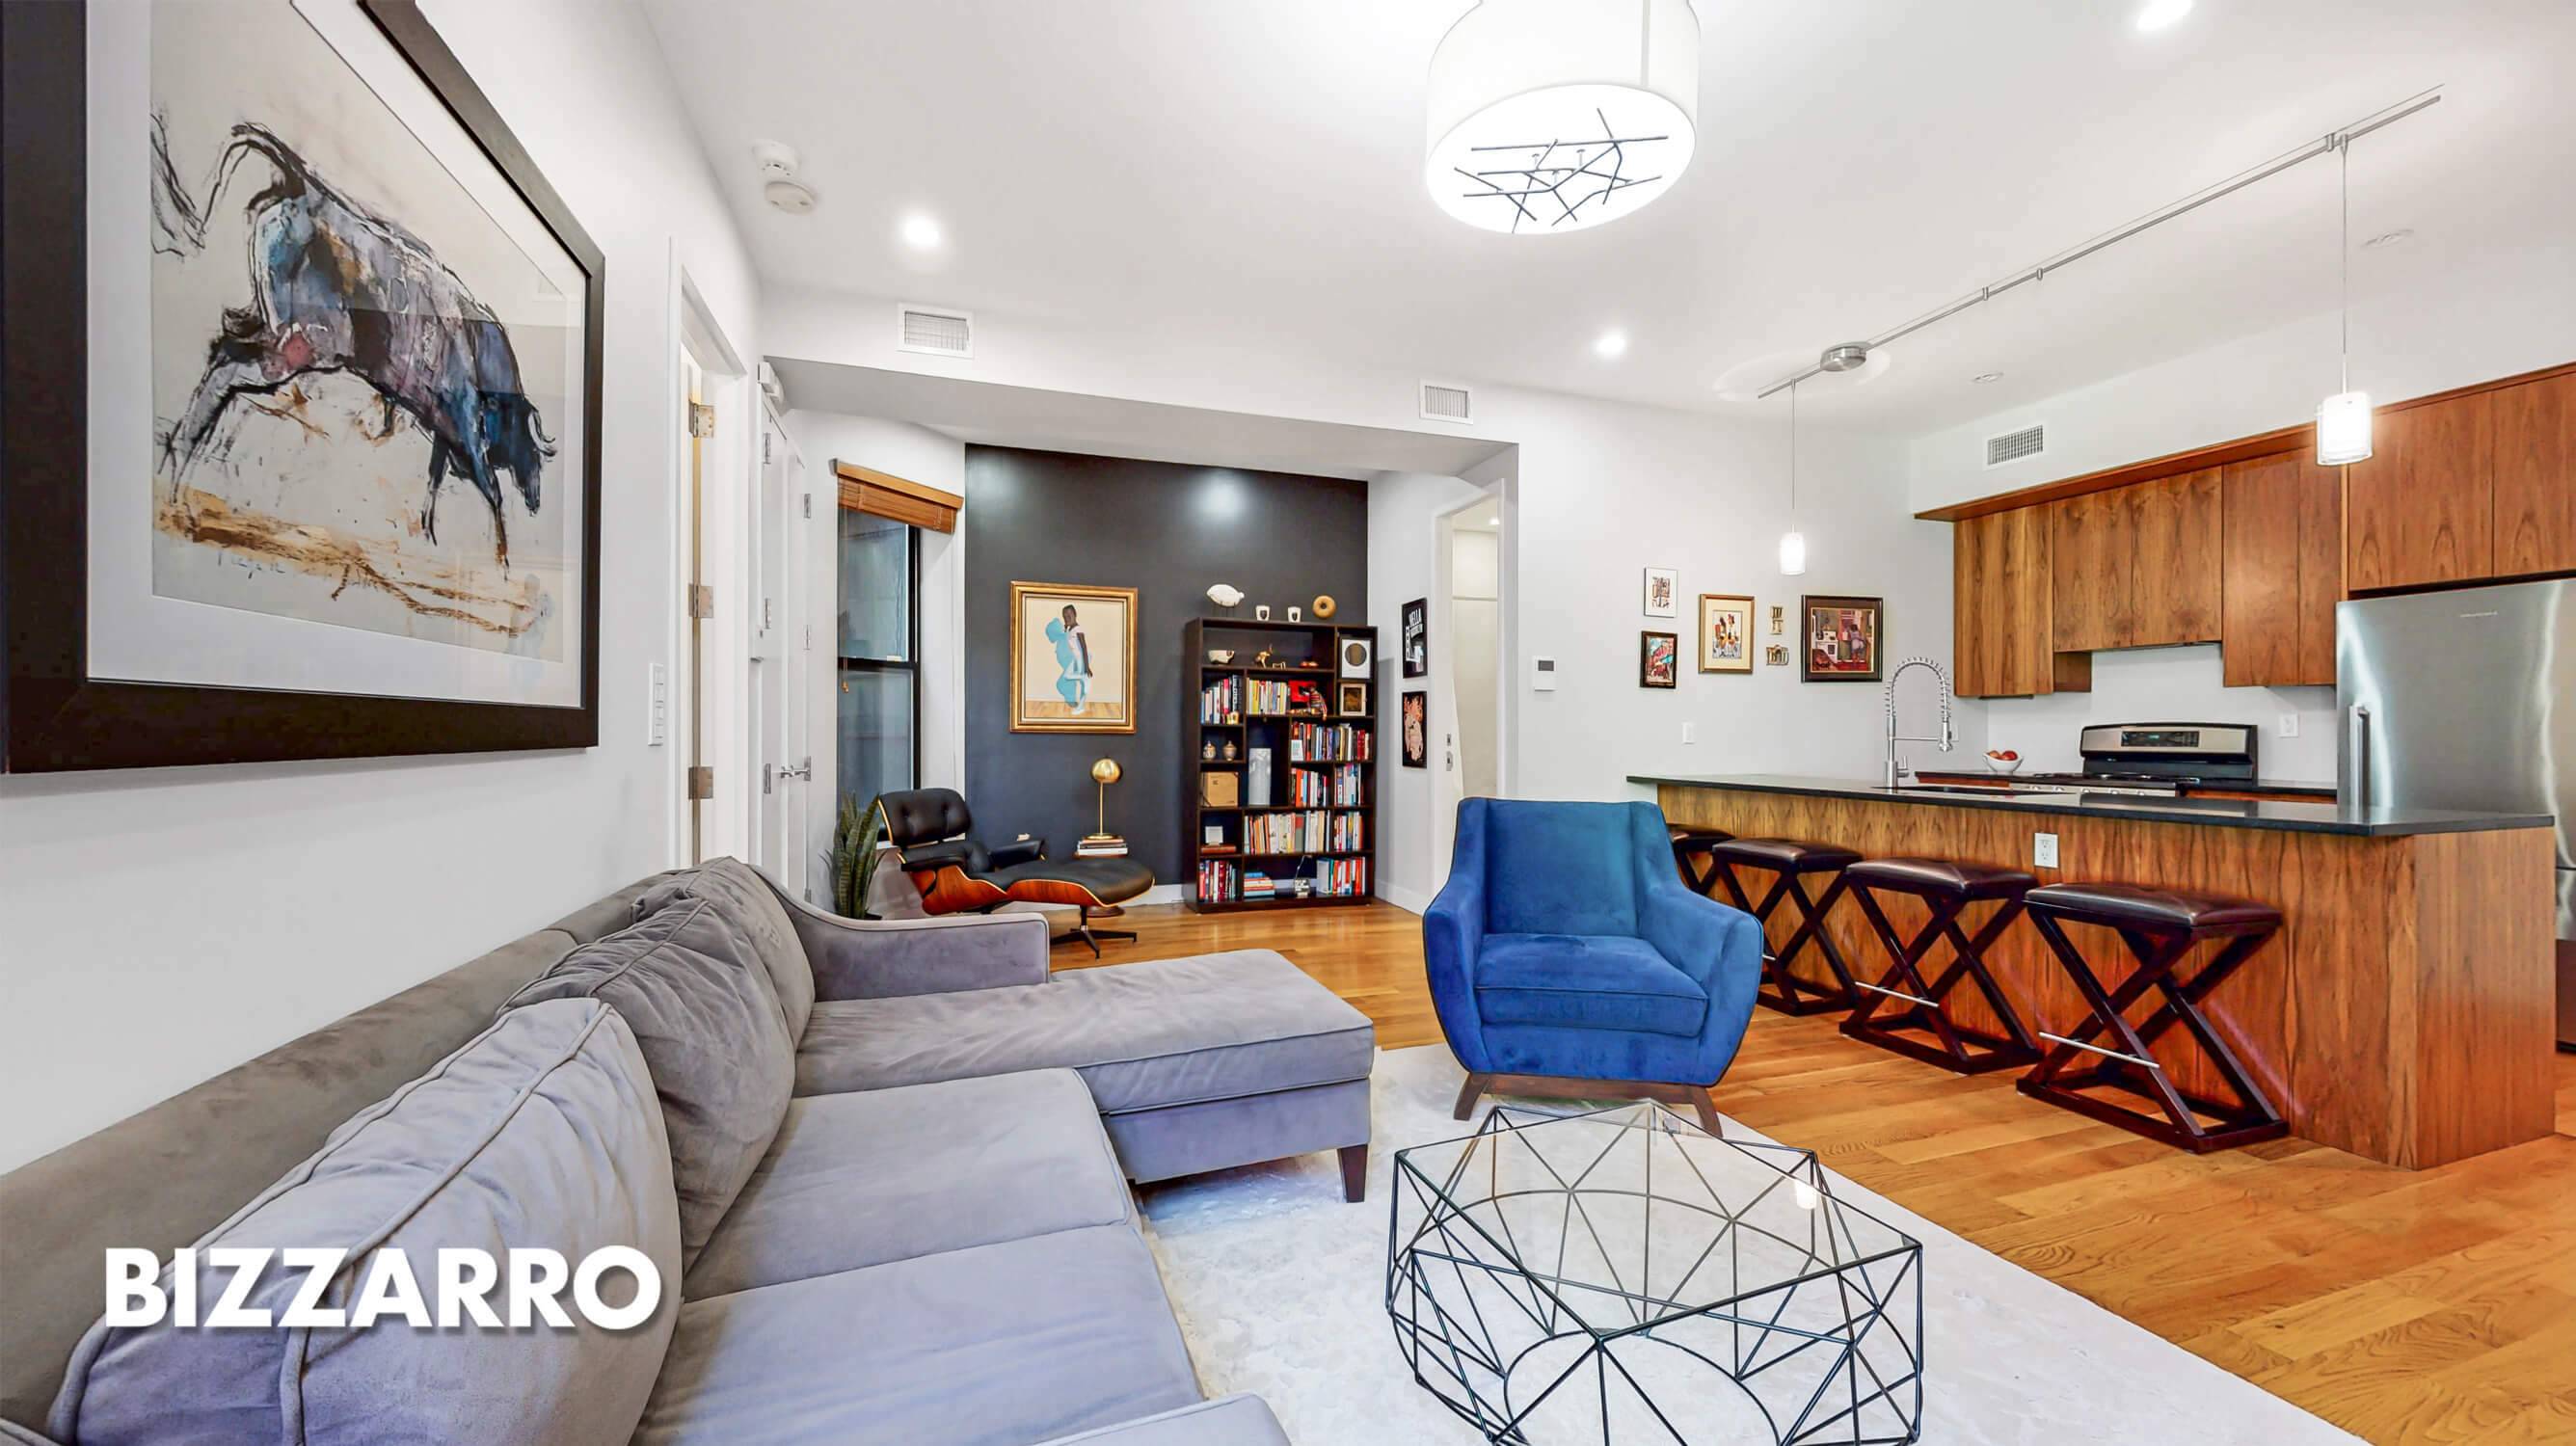 This 1 bedroom, 1 bath condo in the happenin' heart of Brooklyn offers a stylish living space with an open design that encourages you to breathe deeply and unwind.